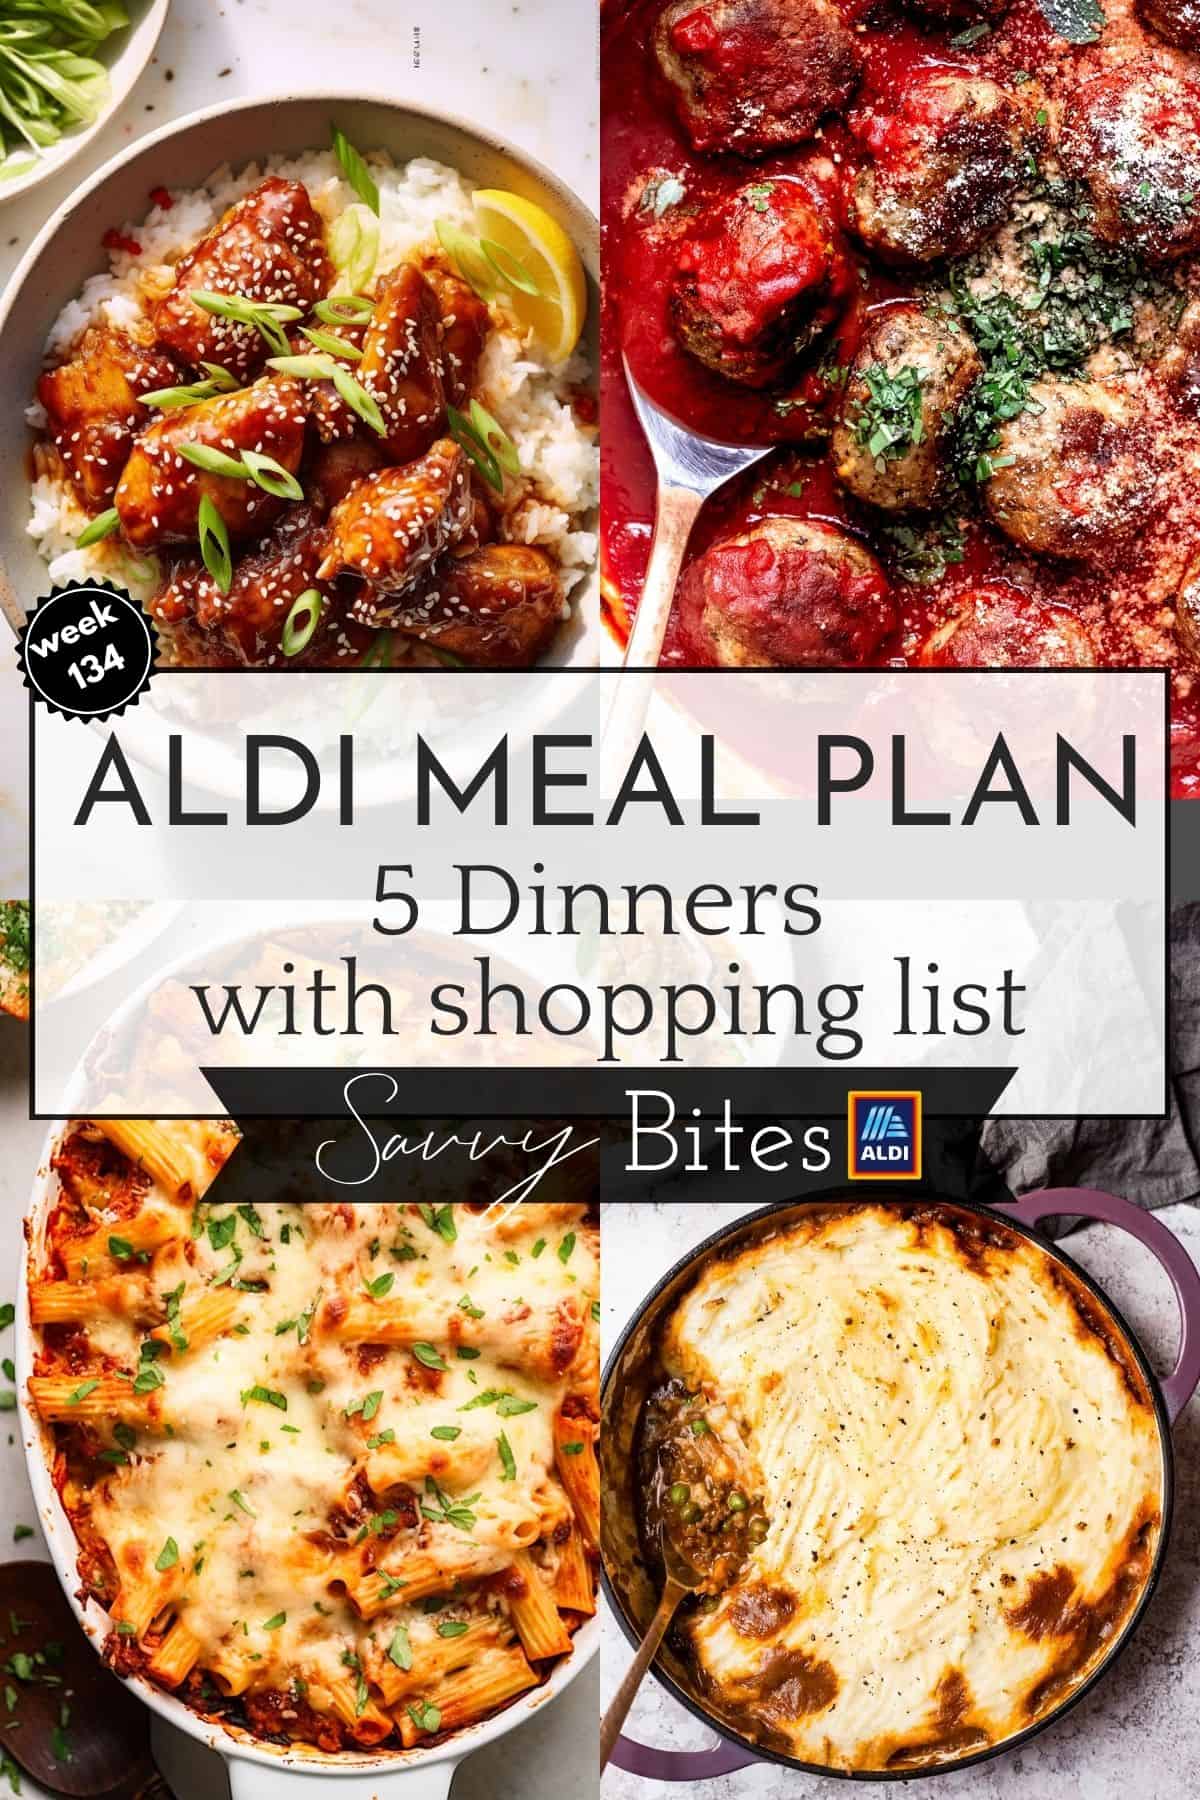 Budget meal plan photo collage using recipes with Aldi ingredients.